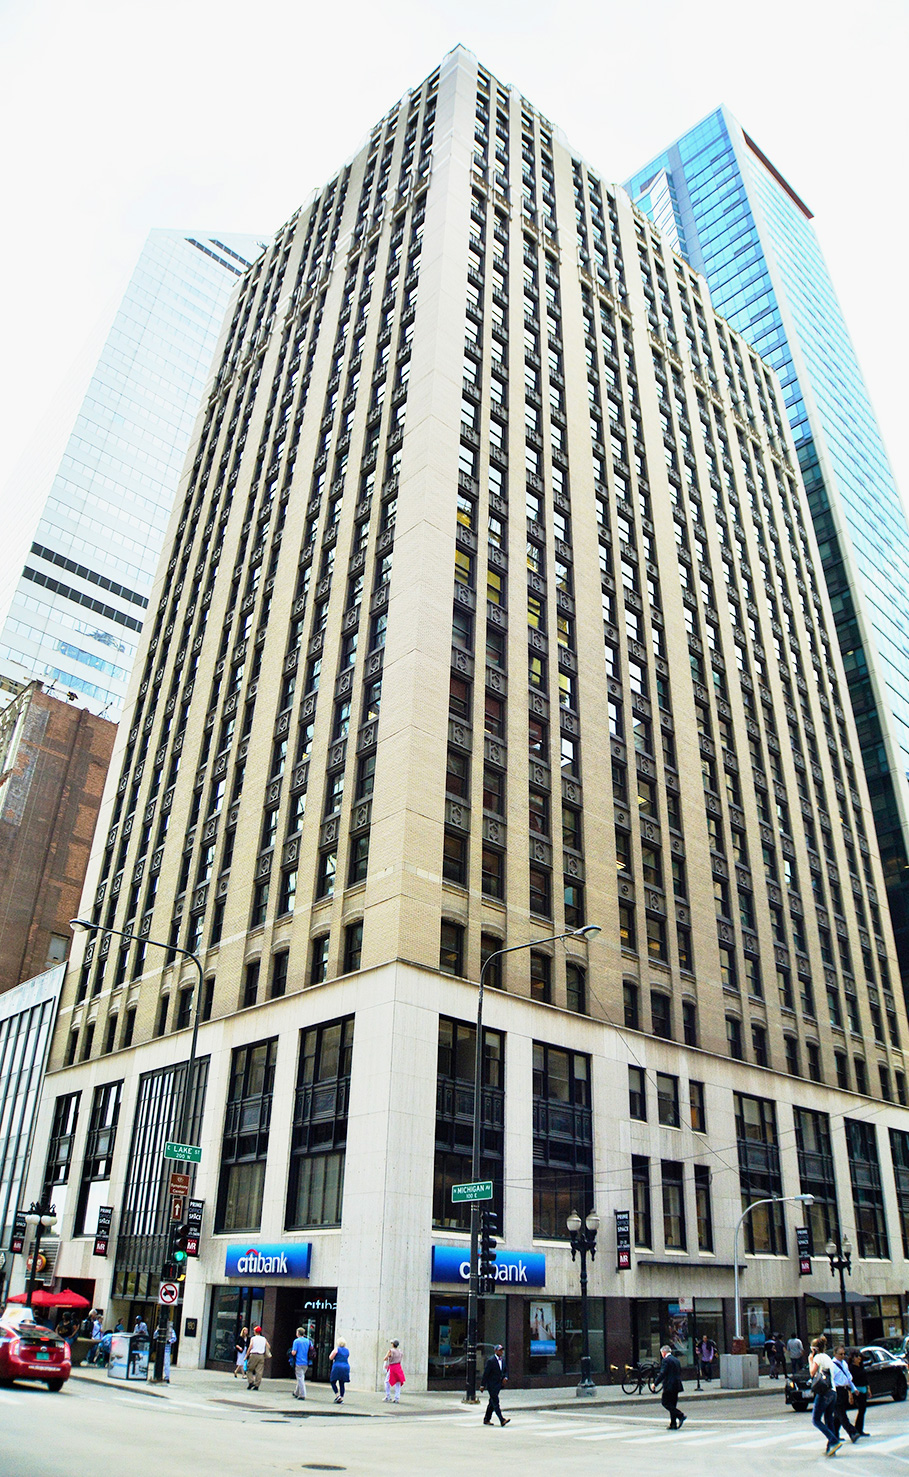 180 N Michigan Ave in Chicago